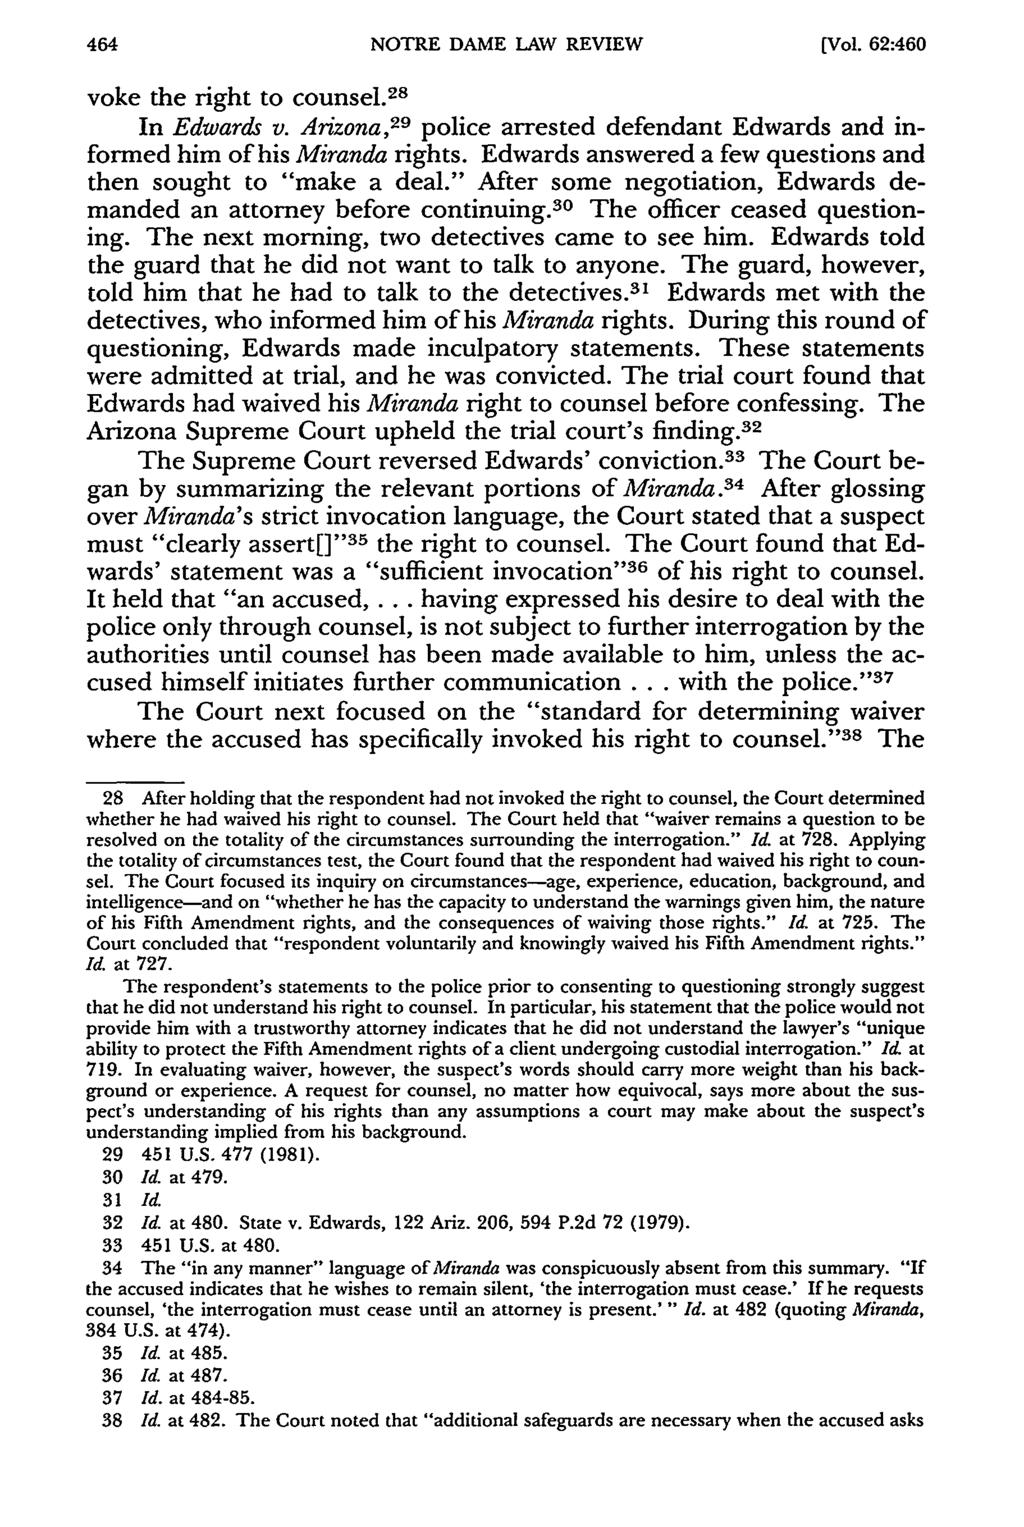 NOTRE DAME LAW REVIEW [Vol. 62:460 voke the right to counsel. 2 8 In Edwards v. Arizona, 29 police arrested defendant Edwards and informed him of his Miranda rights.